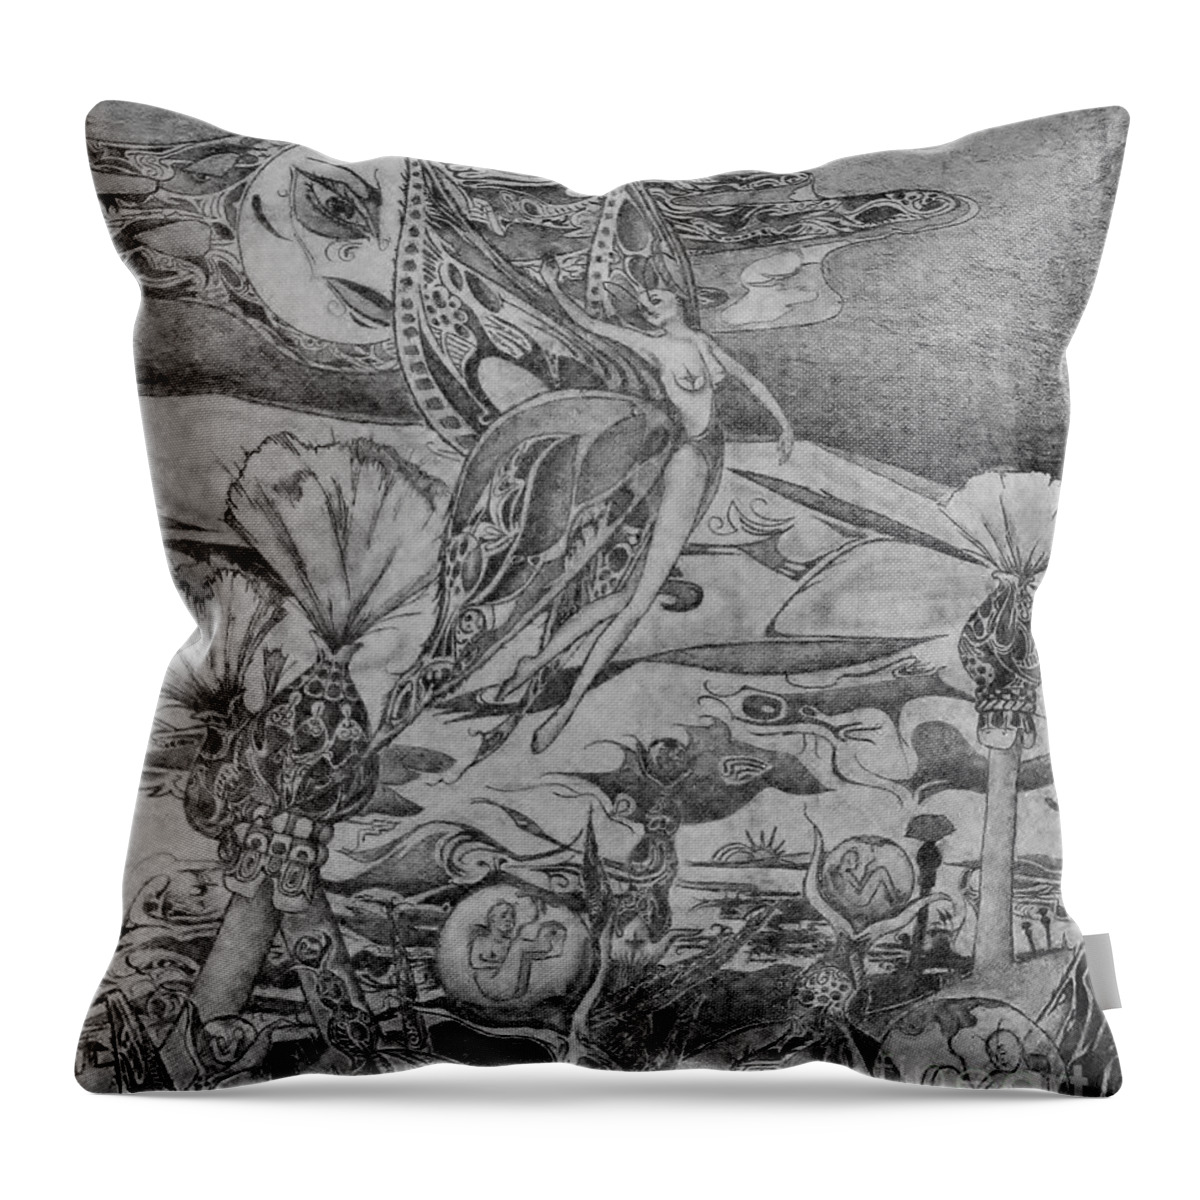 Butterfly Throw Pillow featuring the drawing Butterfly People by Elaine Berger